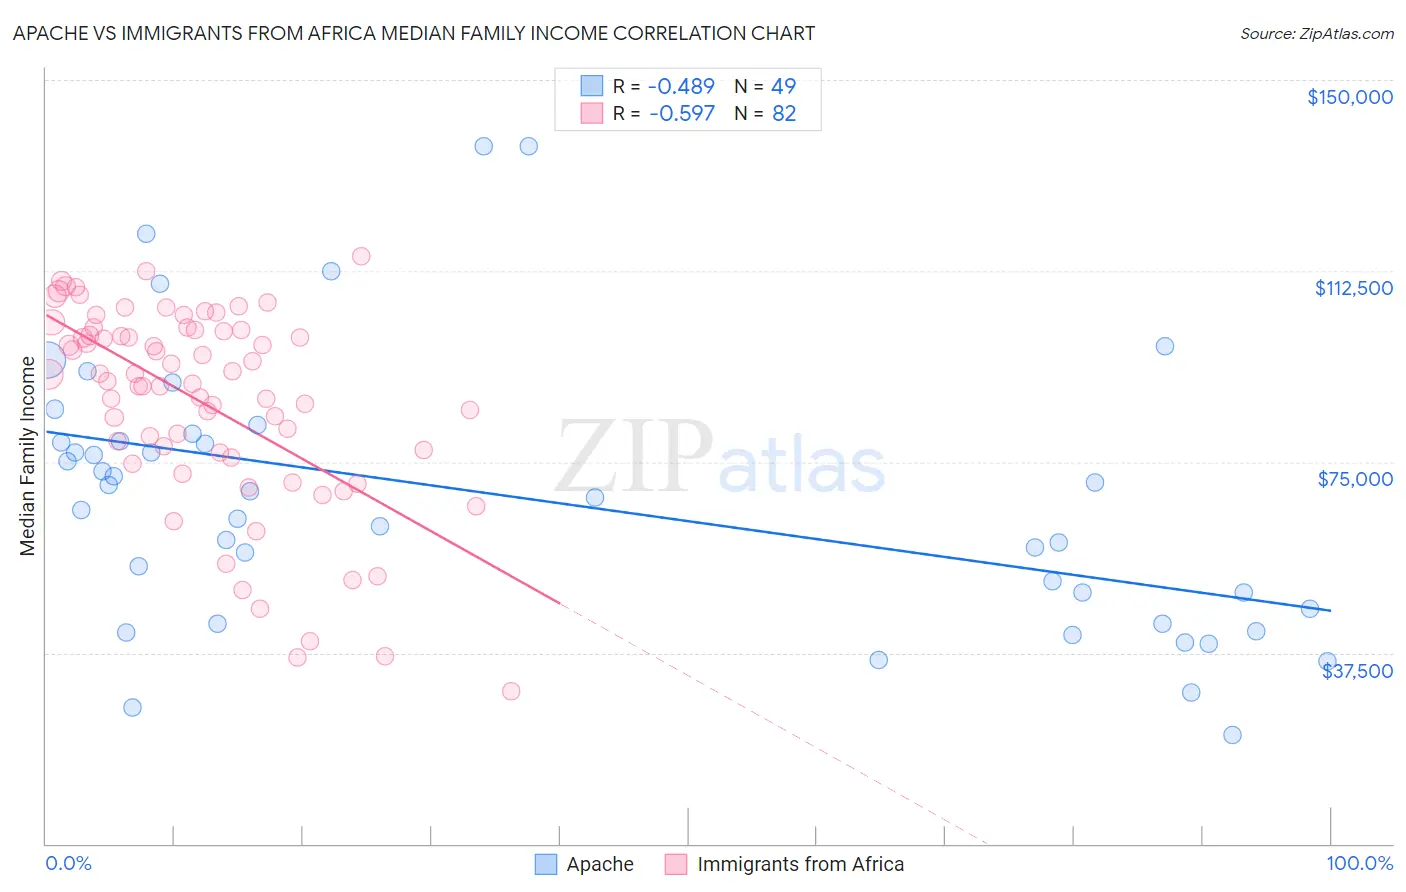 Apache vs Immigrants from Africa Median Family Income